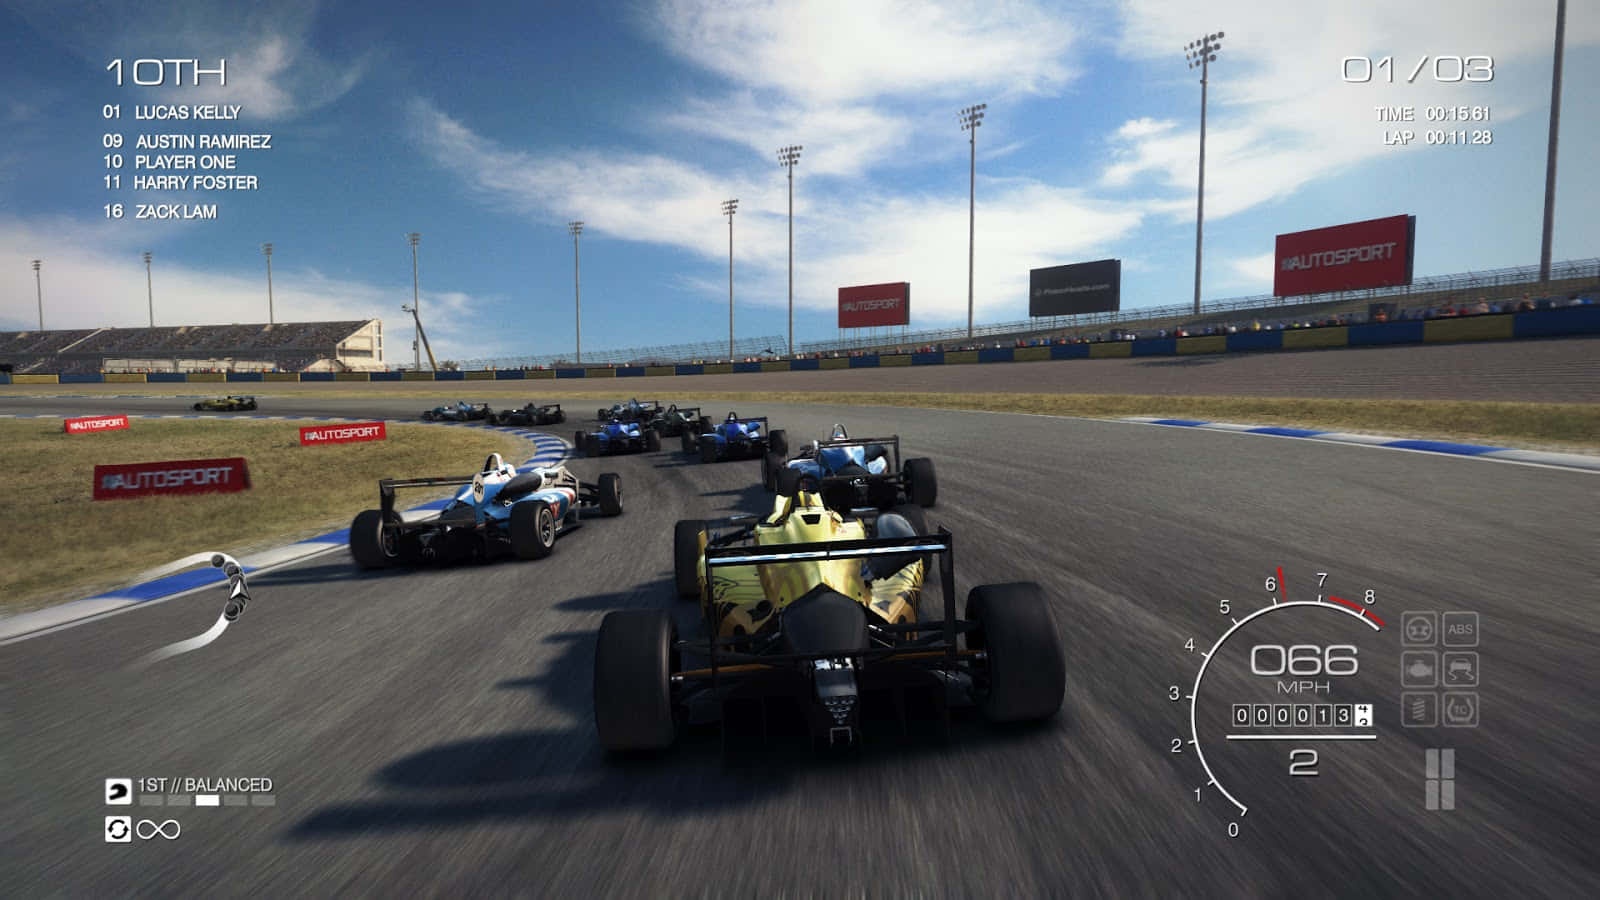 A Screenshot Of A Racing Game With Cars On A Track